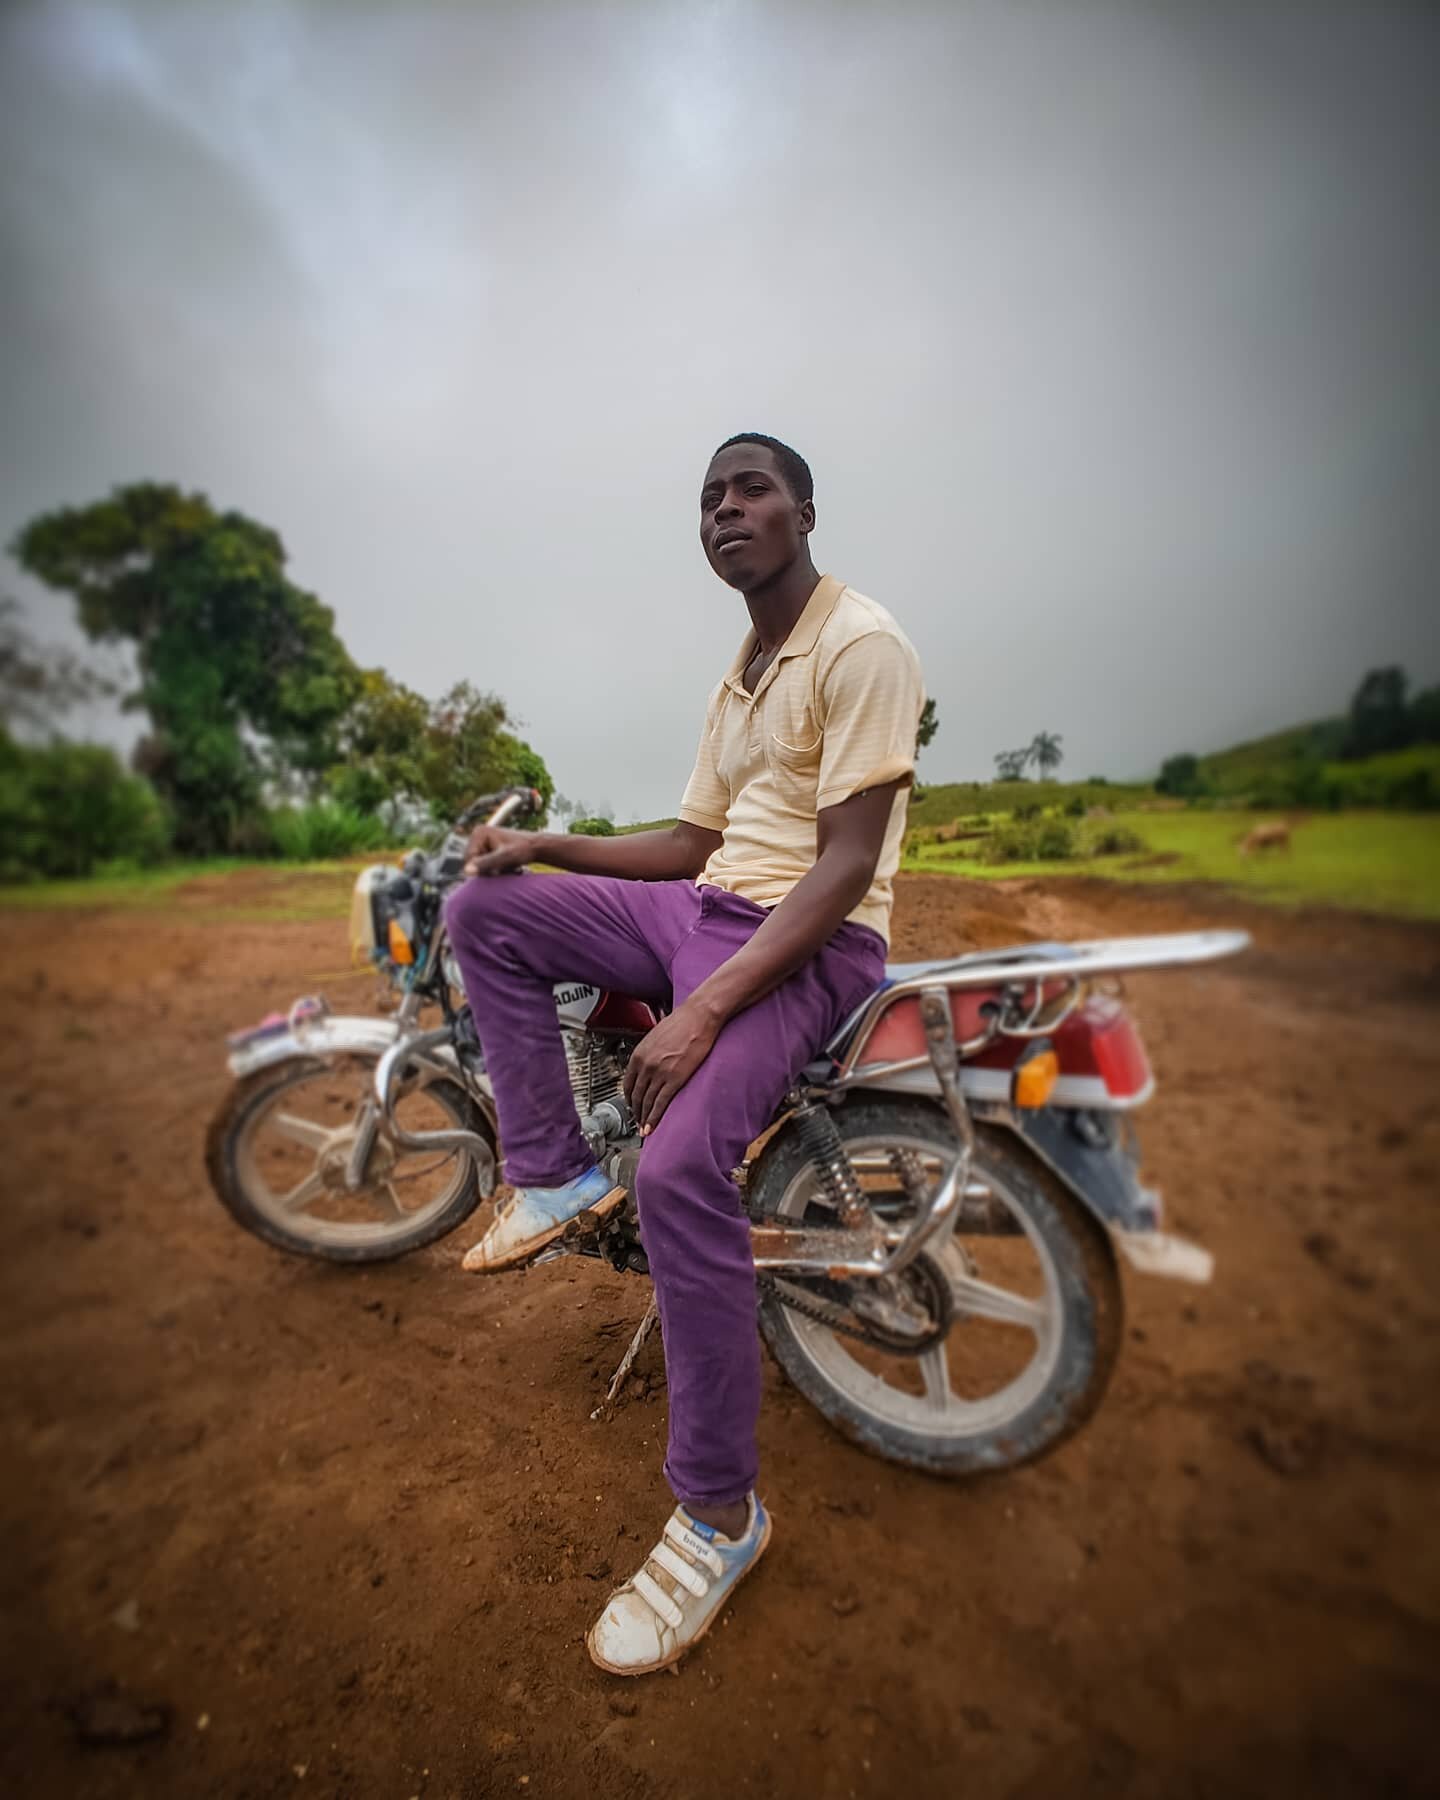 We'd like to introduce Toto, one of the #moto guides we work with in #Haiti ... could this dude be any more cool?! He's a total #badass on his bike, and could not be a nicer guy! 🇭🇹❣
.
.
.
#Ayiticheri 
#bonbagay 
#frmwrx 
#motorcycles 
#purplepants